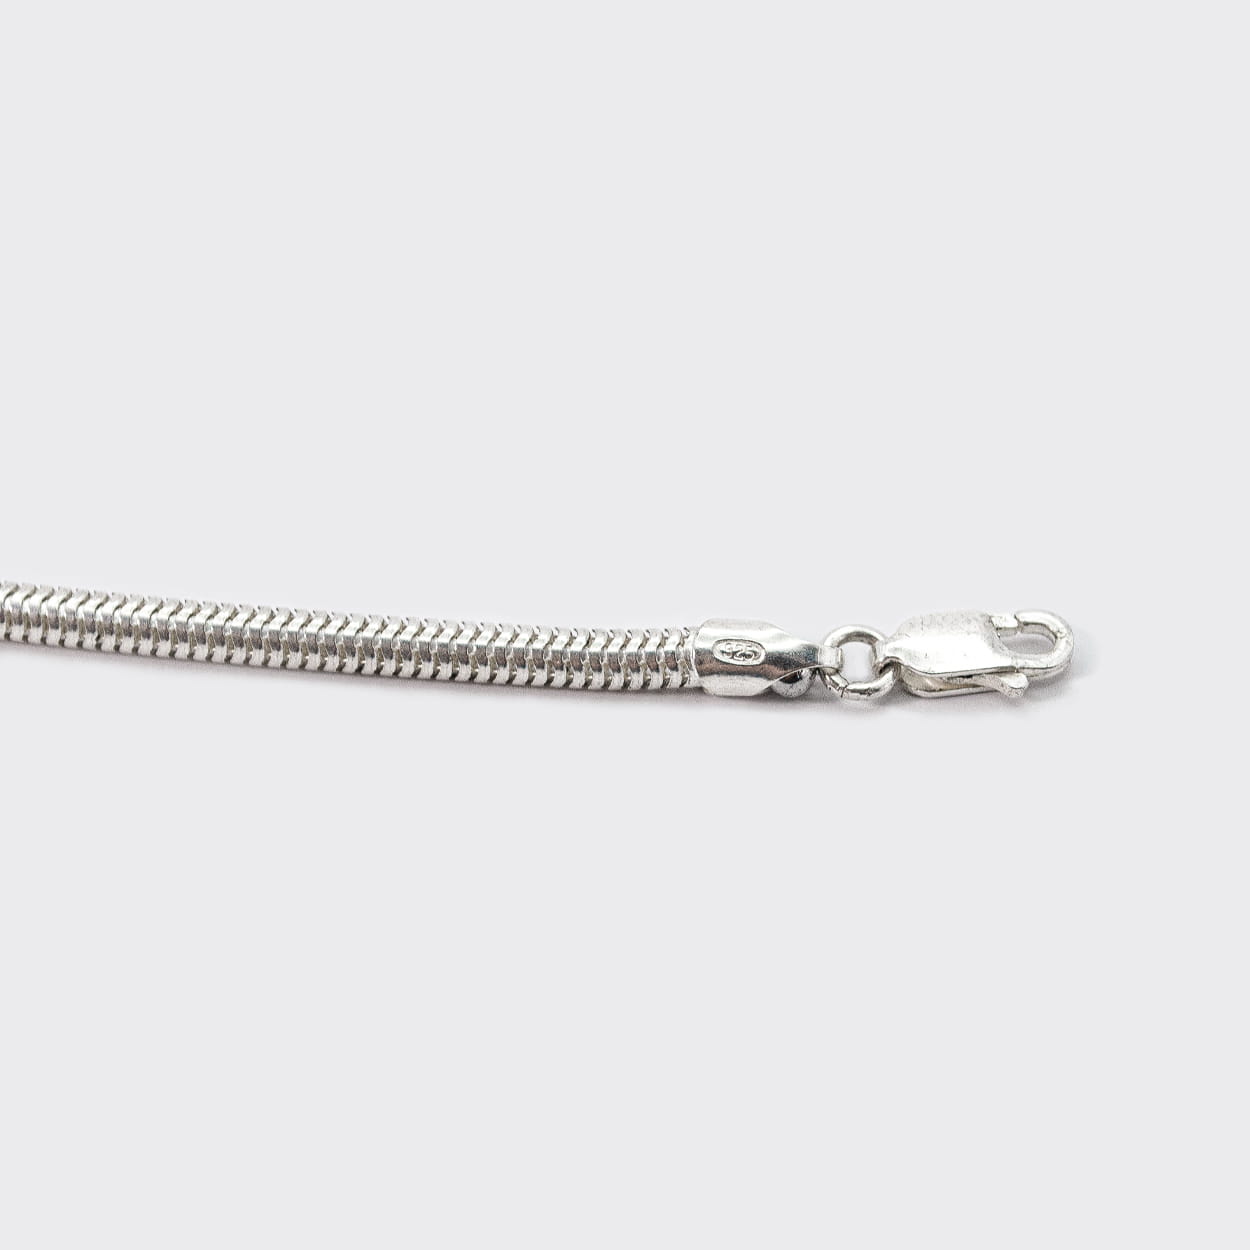 Atelier Domingo's Mamba silver bracelet is made of solid 925 Sterling silver. This unisex bracelet is the classic snake chain. This jewelry is made in Italy and designed to be a bracelet for both men and women.